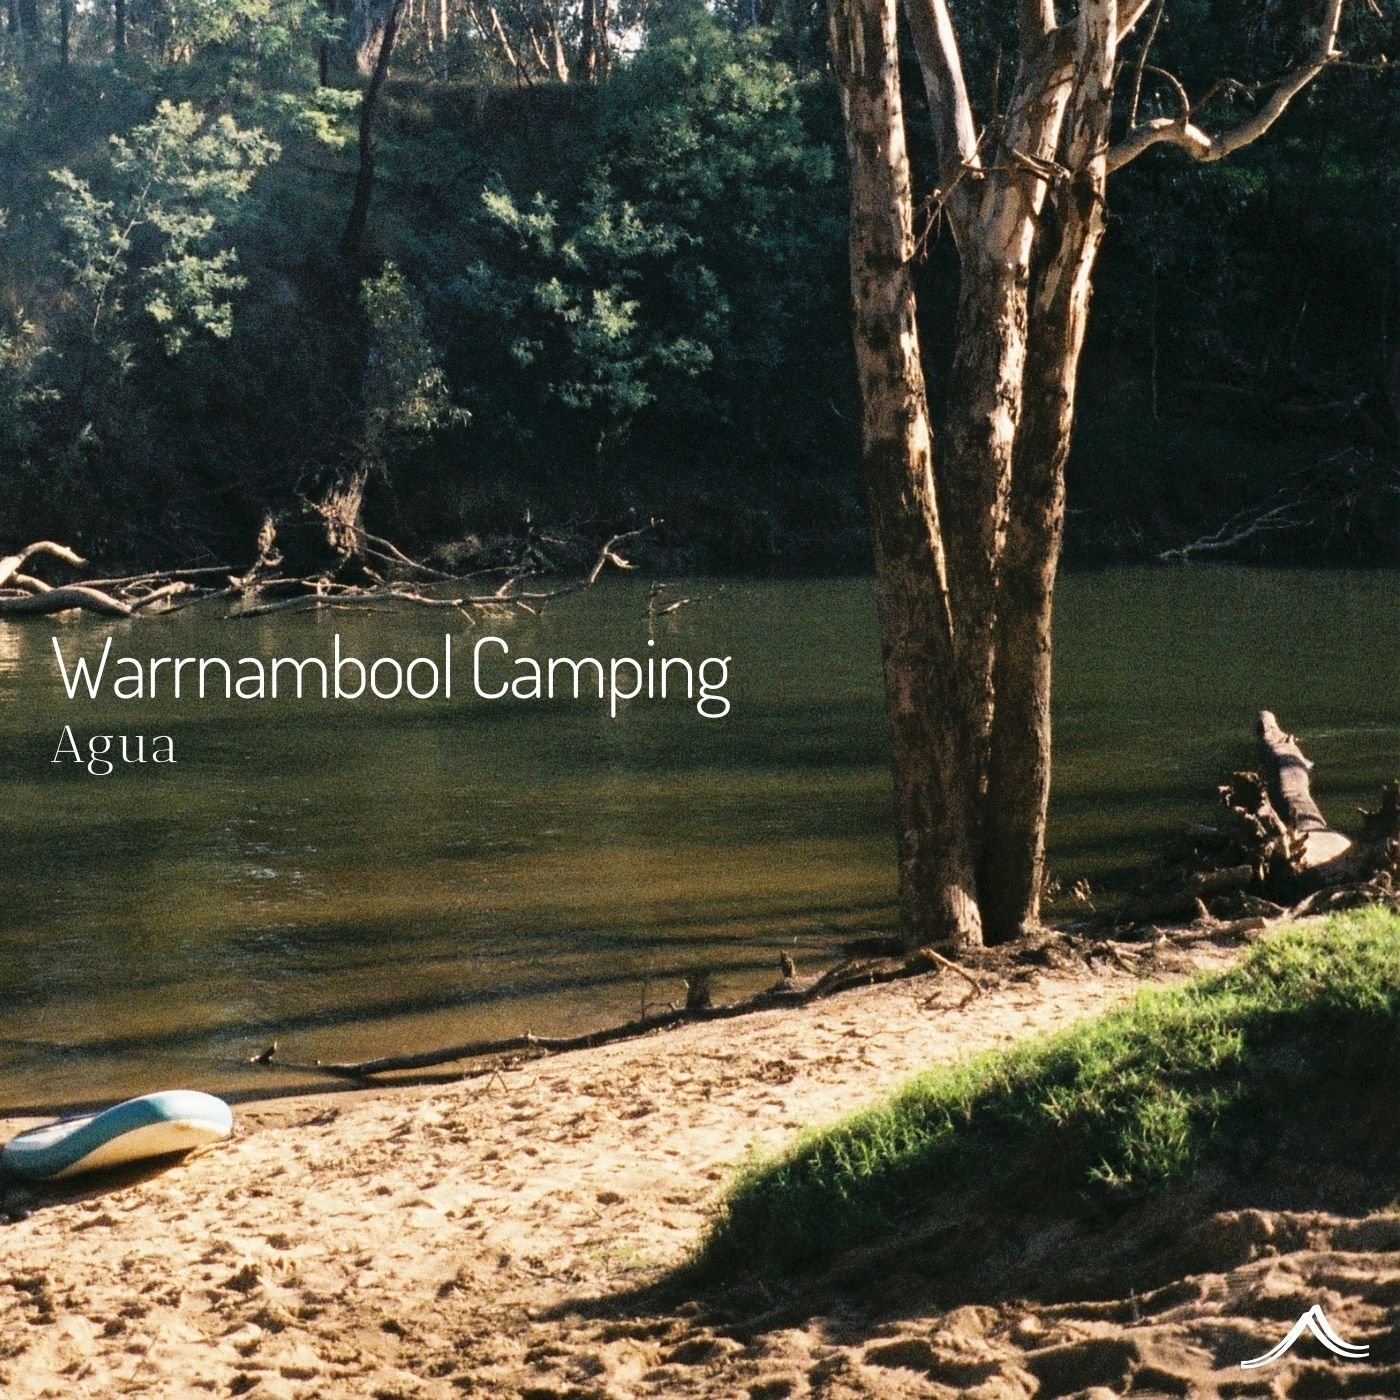 Excited to share my latest field recording on my Agua profile with Soothe Sounds label - 'Warrnambool Camping.' 🎶 

Inspired by serene outskirts of Warrnambool, this track captures the harmonious blend of bird songs, insects, and the cheerful barkin